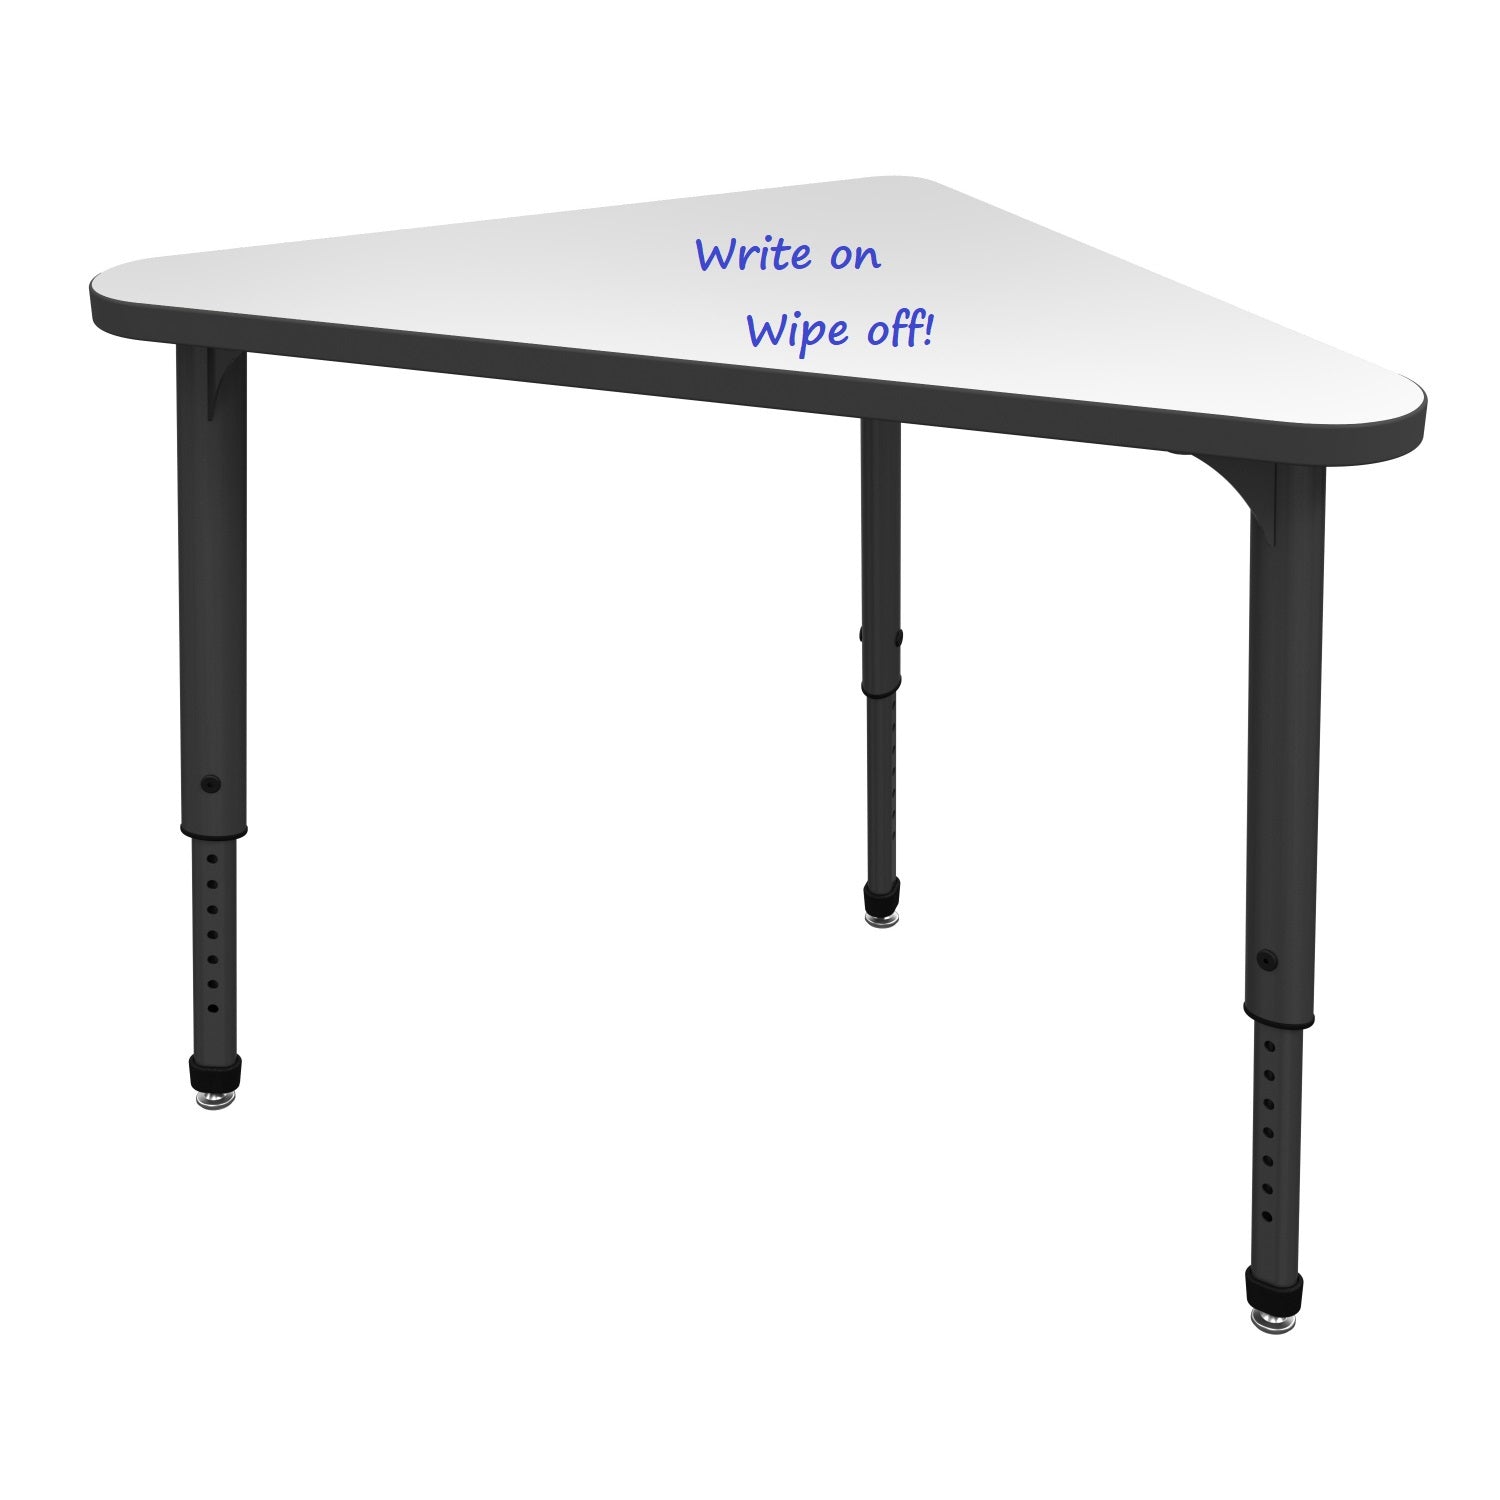 Apex Adjustable Height Collaborative Student Desk with White Dry Erase Markerboard Top, 23" x 40" Triangle